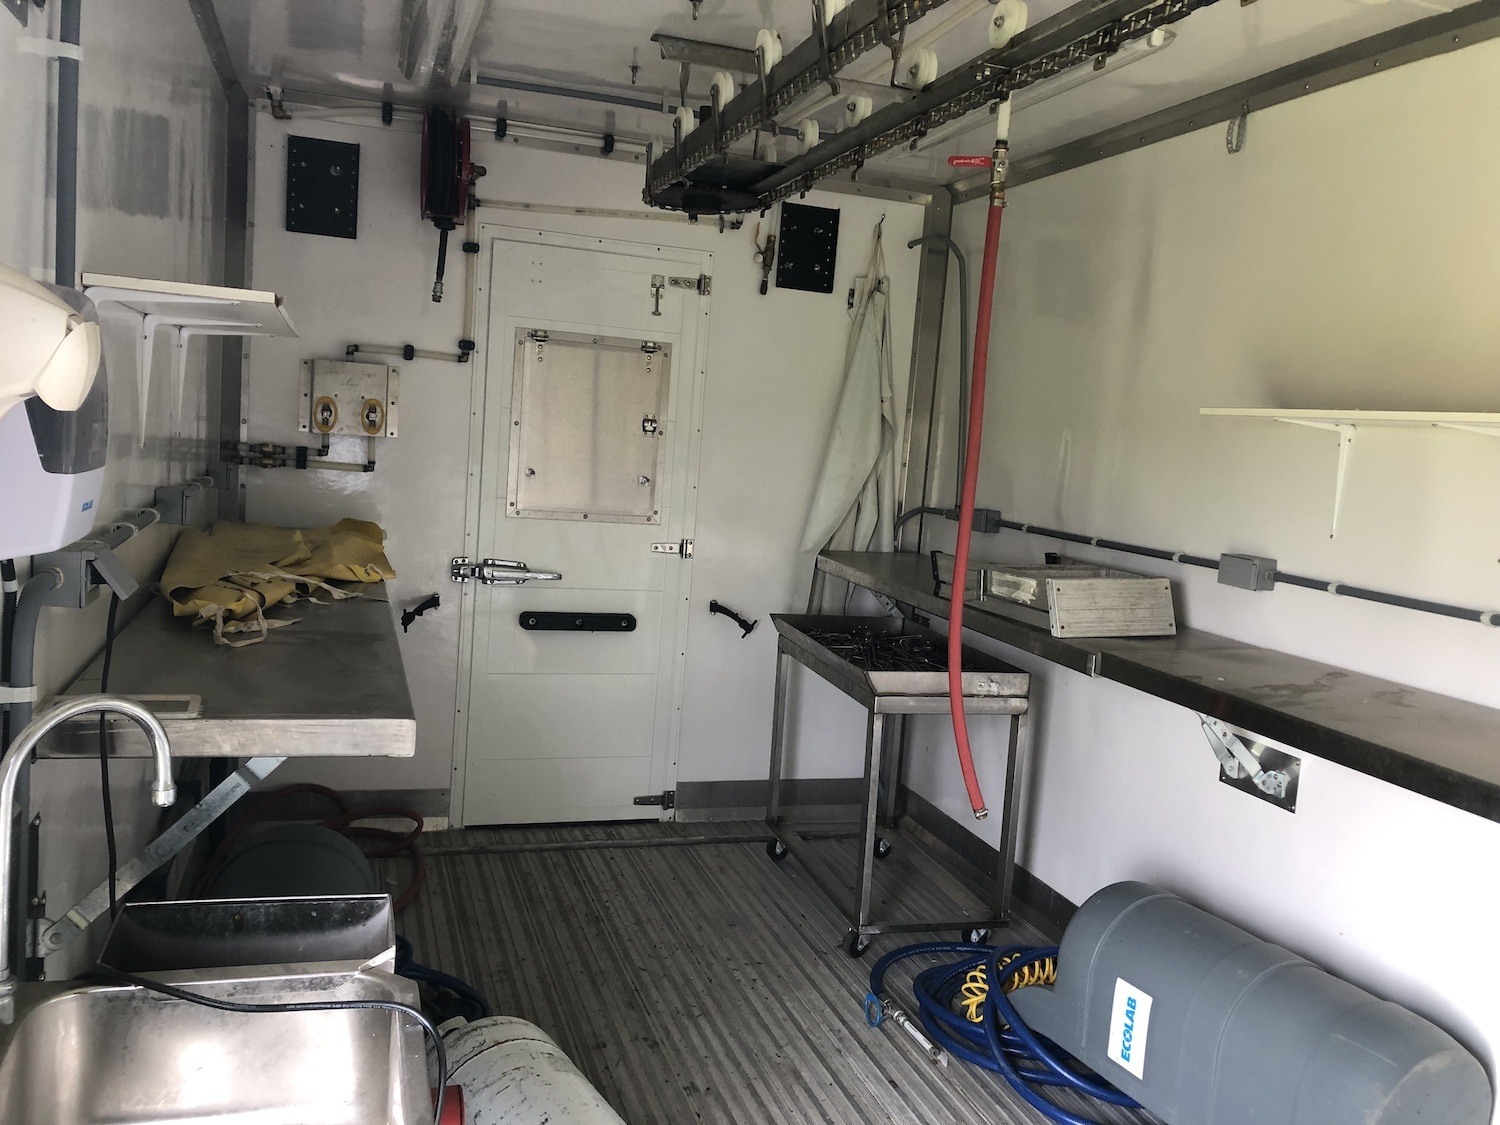 Inside Makoce Ag's mobile poultry processing unit. March 2021